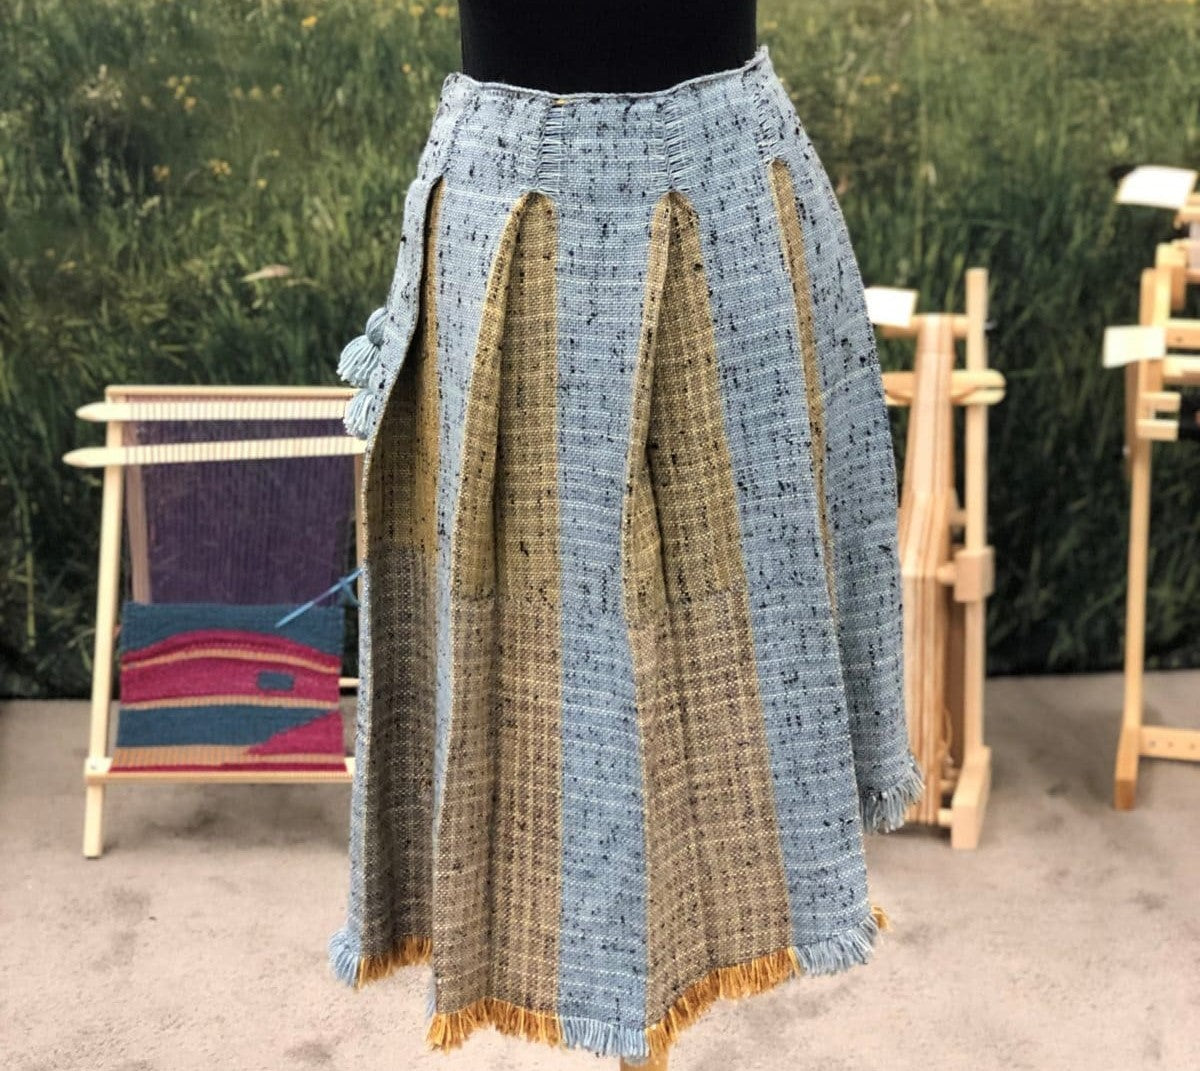 Channeling Chanel in a Handwoven Pleated Skirt